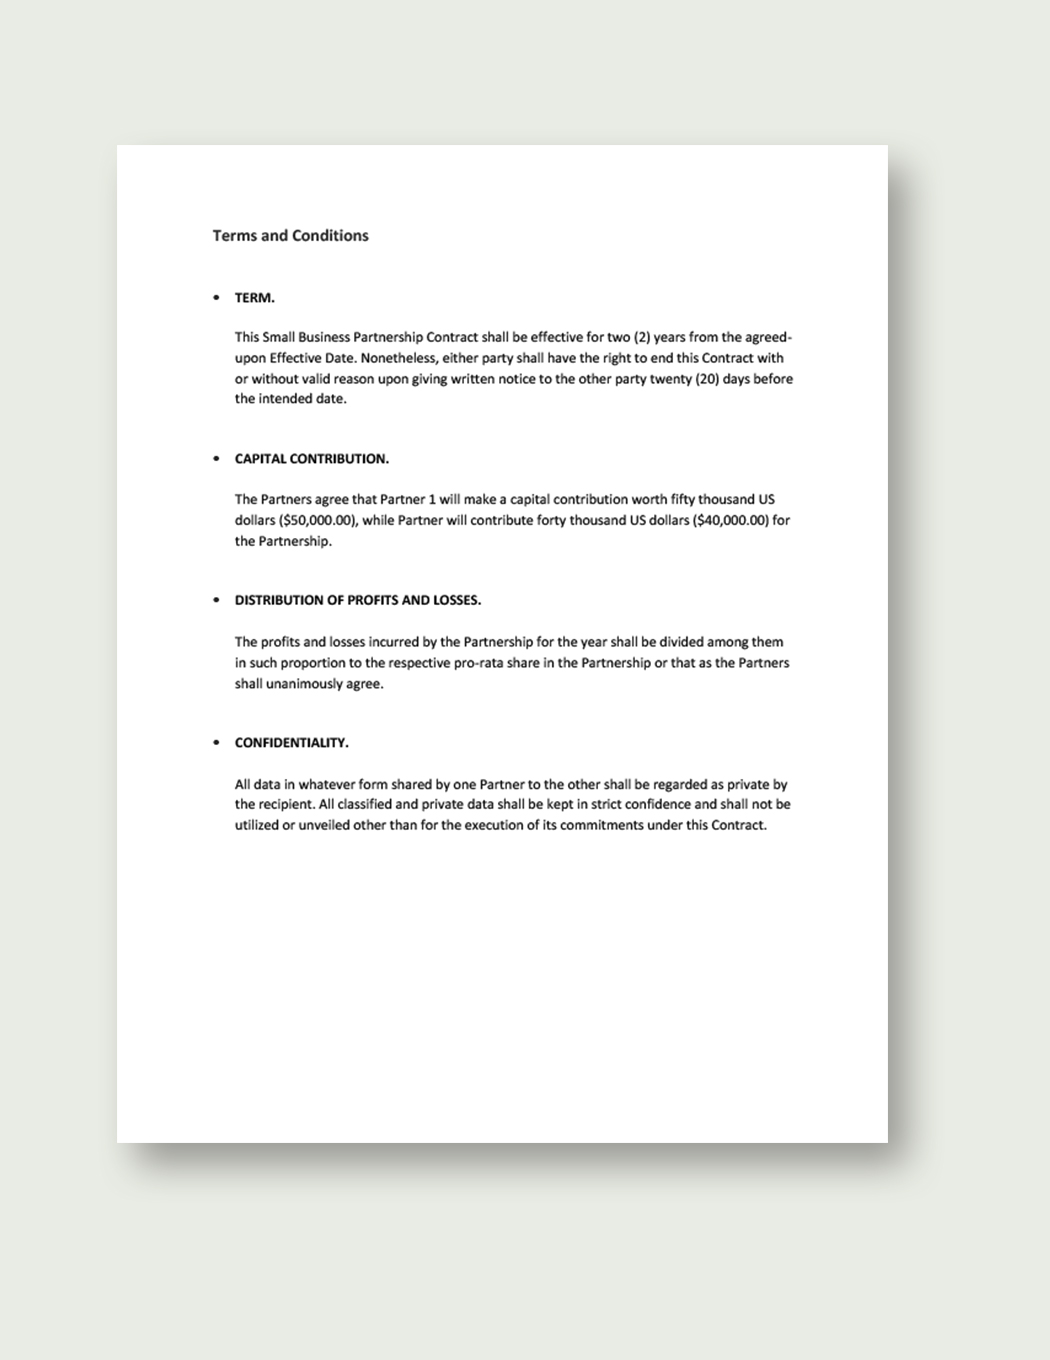 Small Business Partnership Contract Template